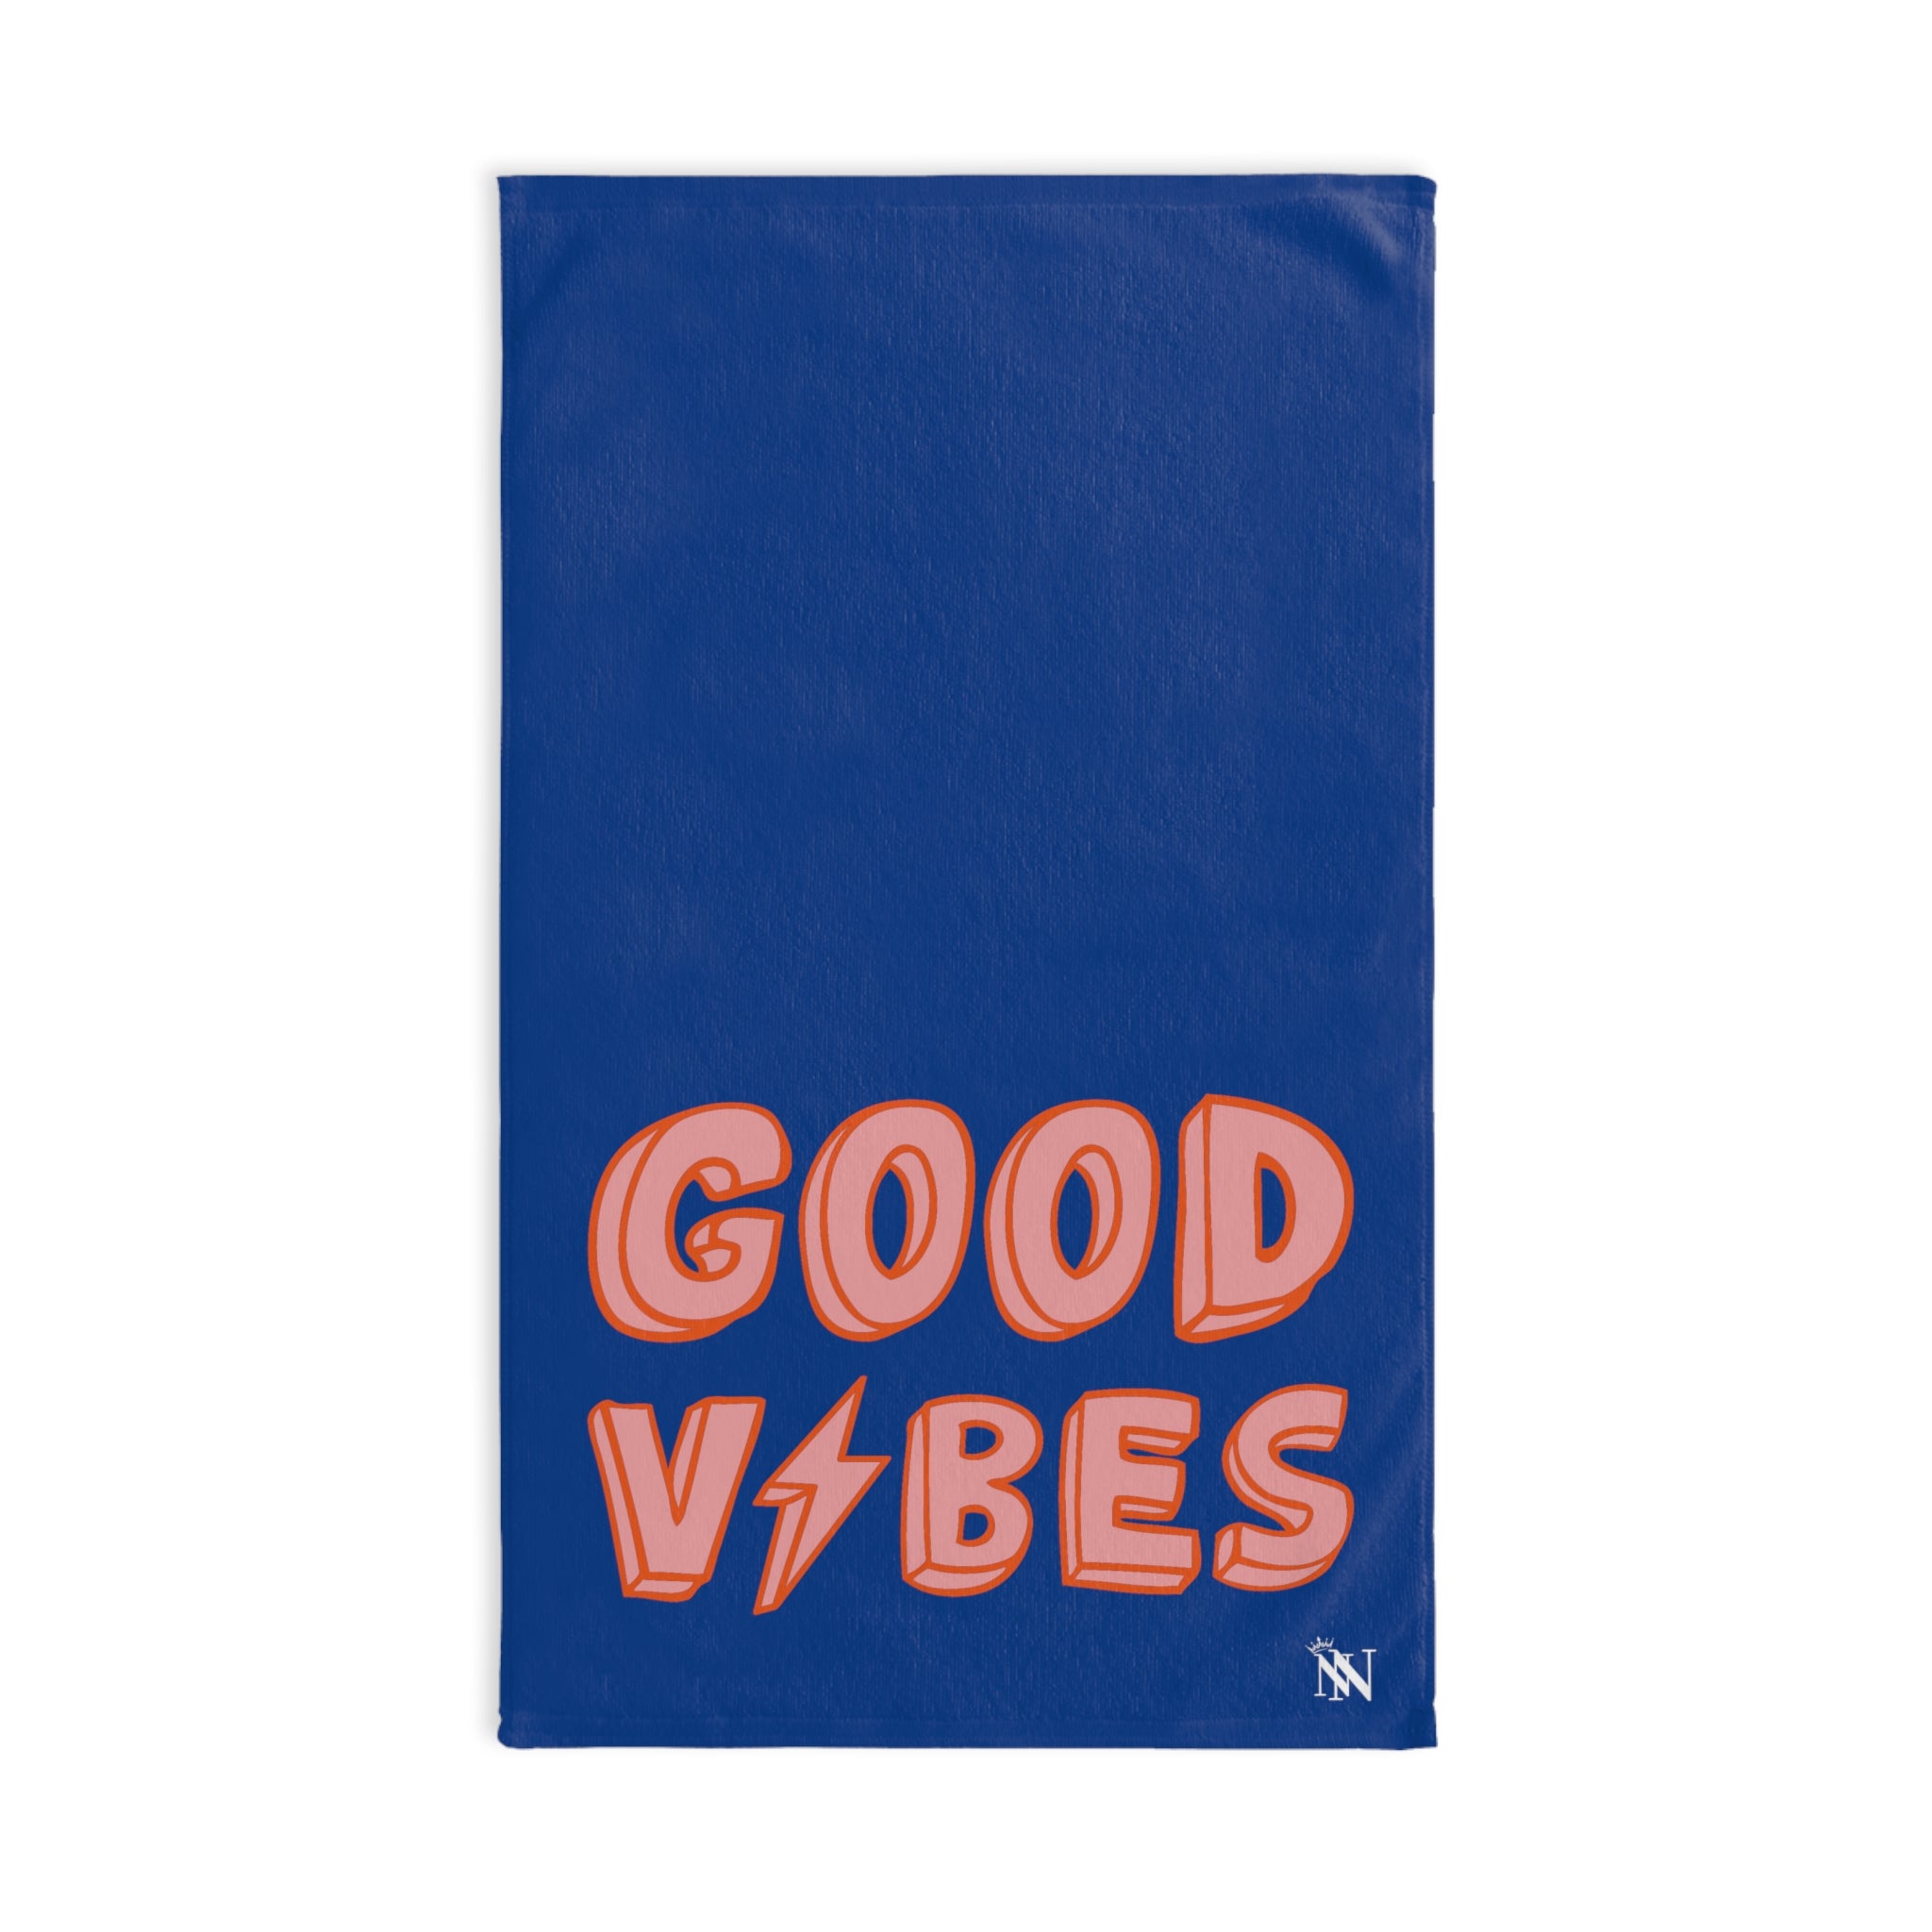 Electric Vibe Good Blue | Gifts for Boyfriend, Funny Towel Romantic Gift for Wedding Couple Fiance First Year Anniversary Valentines, Party Gag Gifts, Joke Humor Cloth for Husband Men BF NECTAR NAPKINS